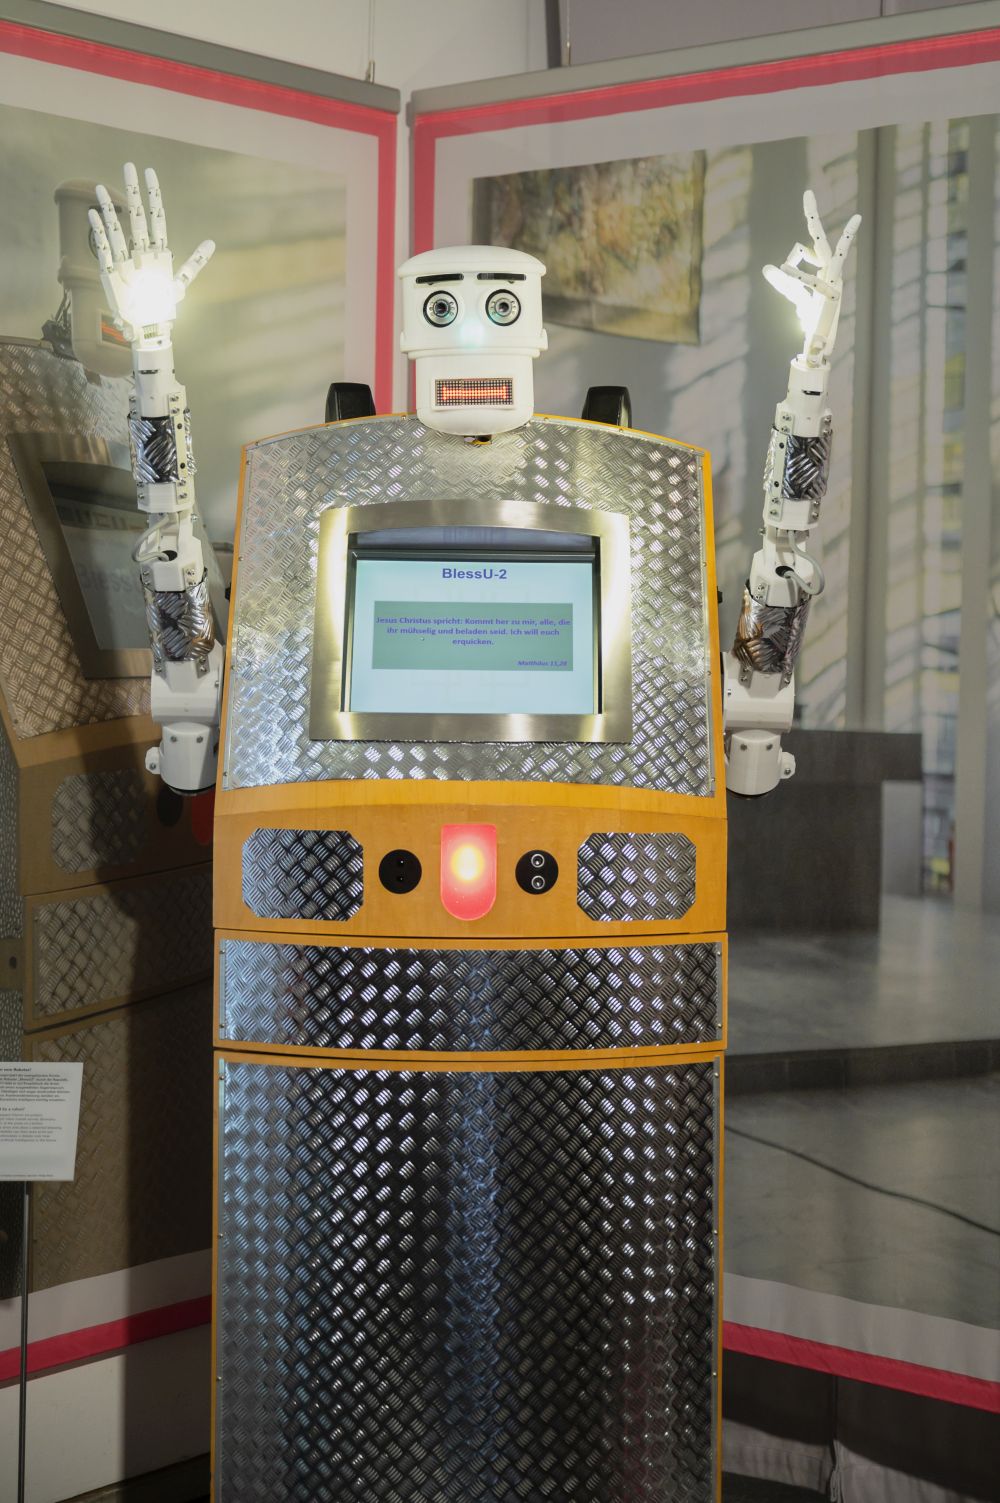 A "blessing robot" of the Protestant church blesses visitors